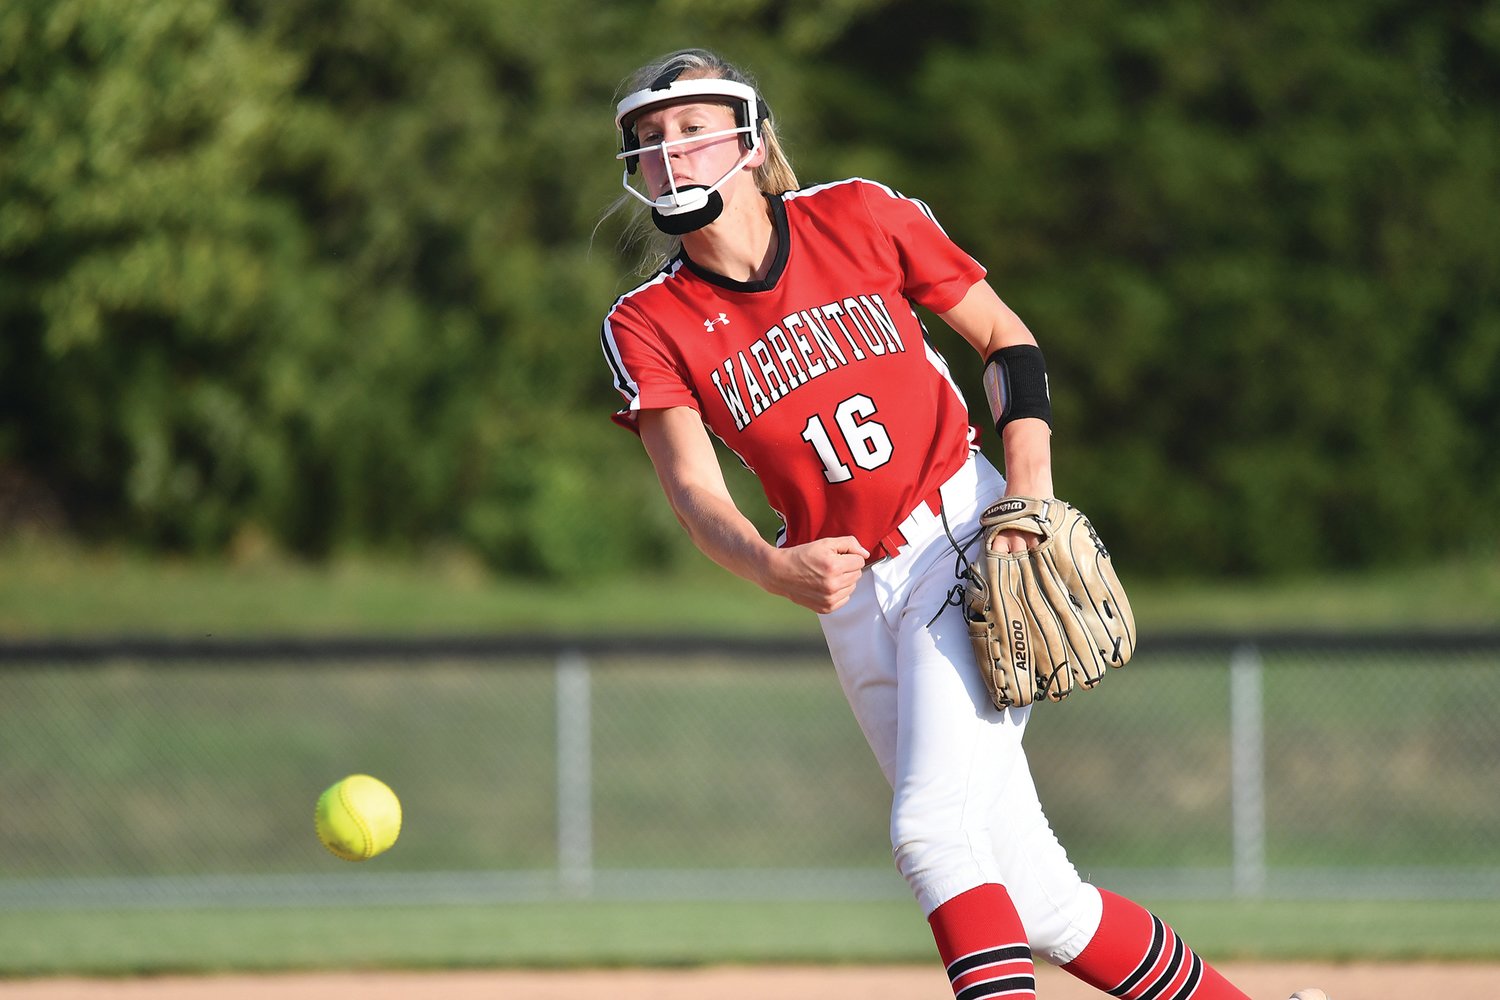 ACE ON THE MOUND — Warrenton senior hurler Kathryn McChristy delivers a pitch in a game earlier this season. The right-hander earned the win in relief, striking out seven and walking one.